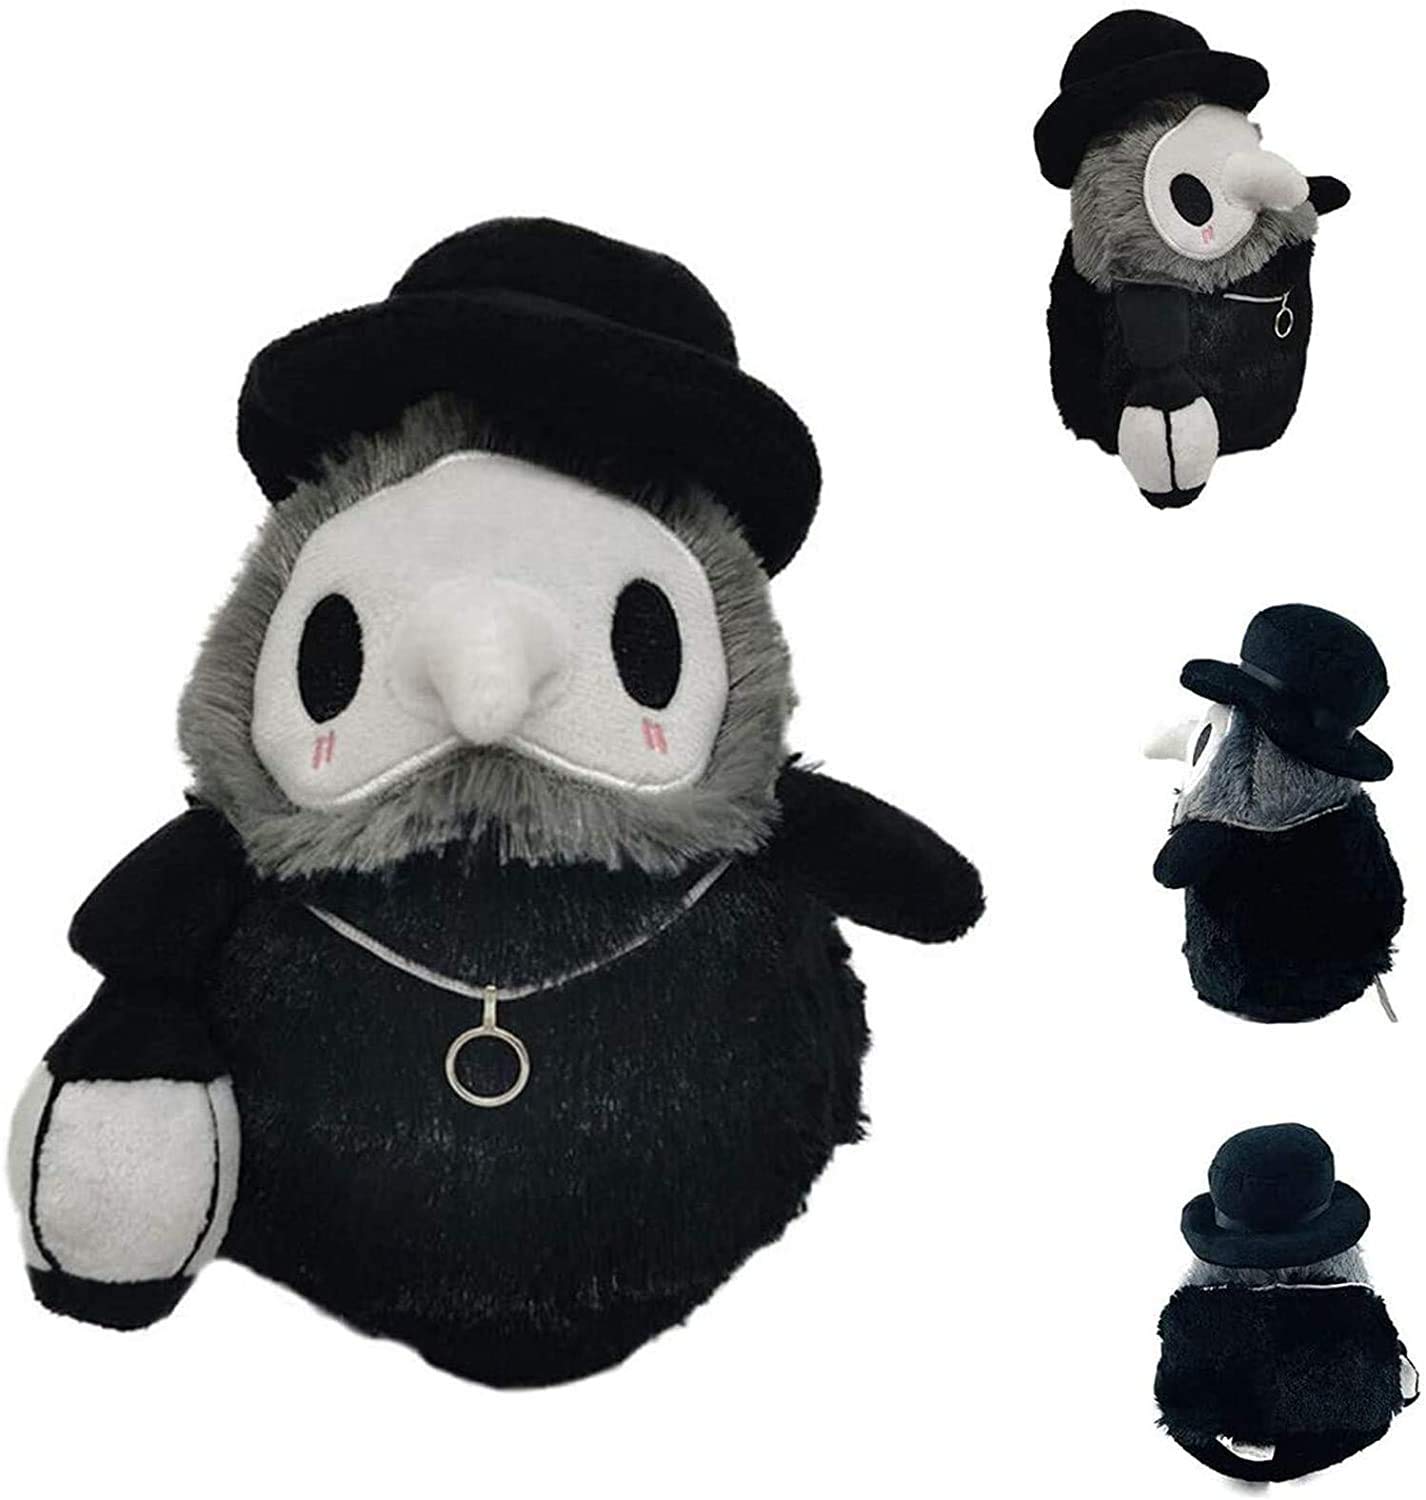 Fluffy Plague Doctor Plush Toy Best Gifts for Doctor Nurse and Kids Glow In Dark 20cm Stuffed Crow Doll 